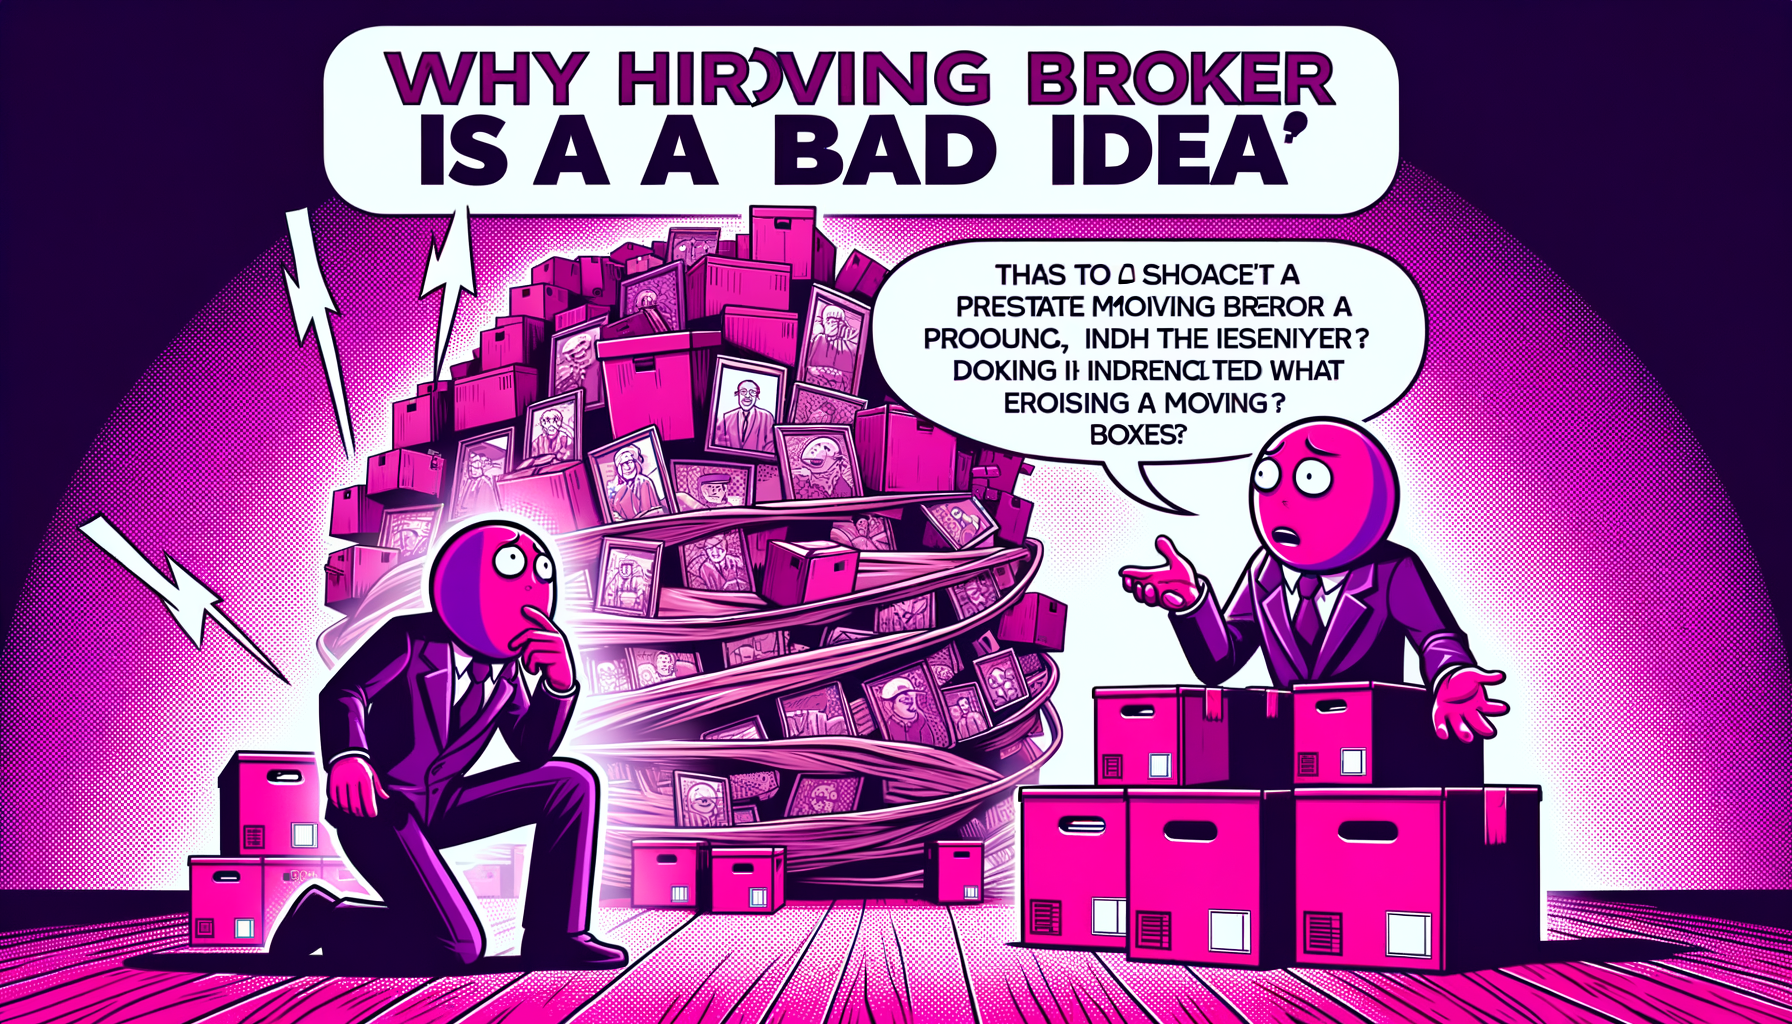 Cartoon illustration in fuschia tones depicting a confused customer surrounded by puzzling moving boxes, symbolizing the pitfalls of hiring a moving broker, emphasizing caution and research.